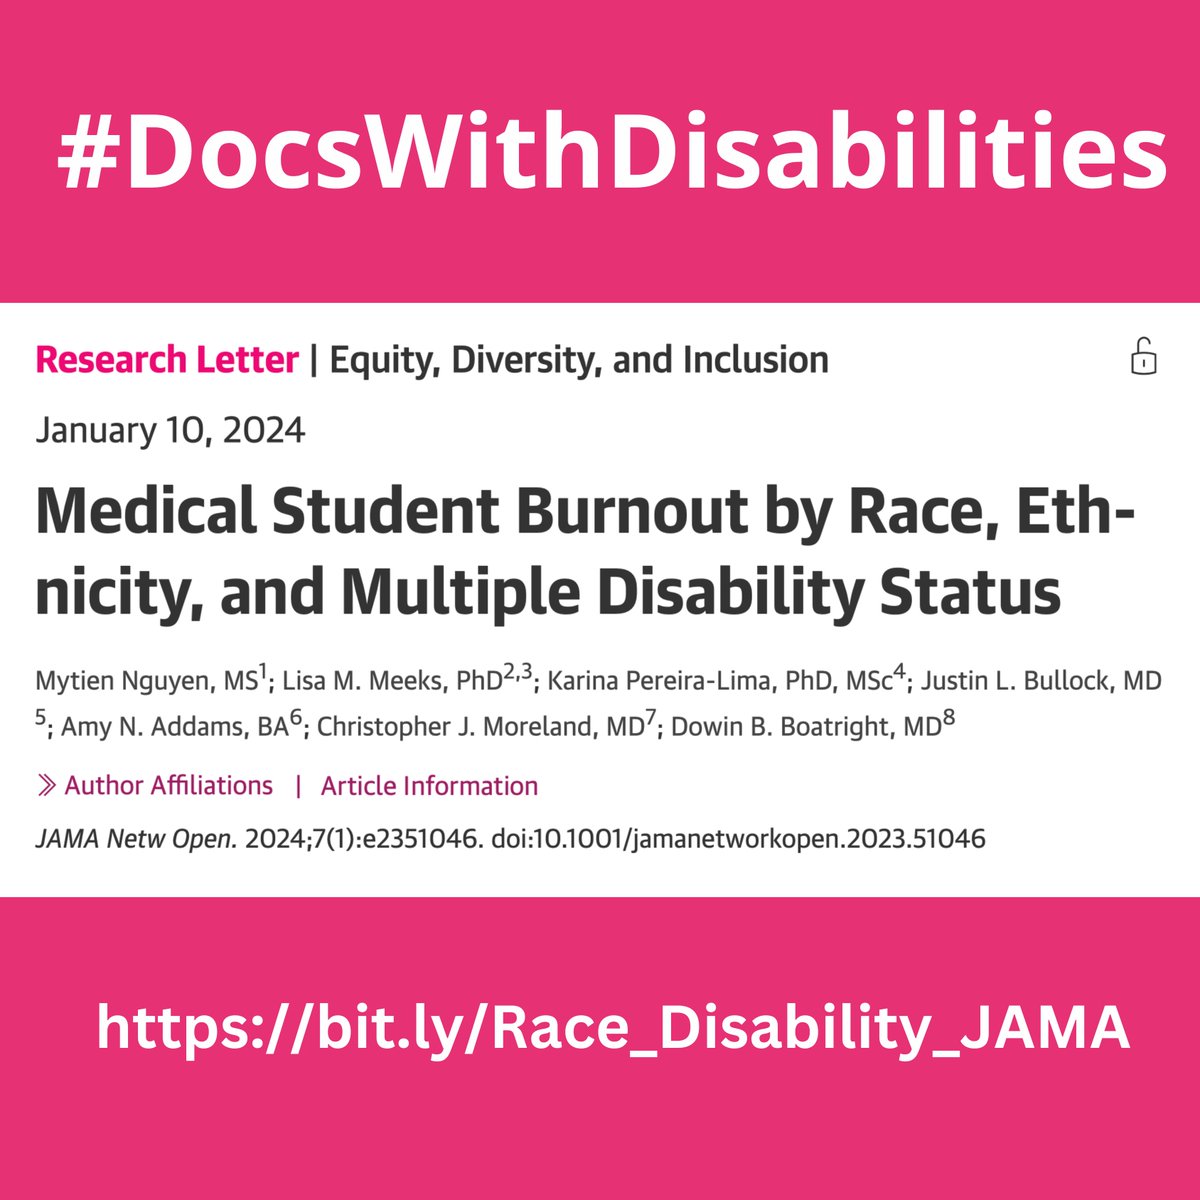 📢 New Paper: @JAMANetworkOpen 'This study highlights the necessity to address burnout among Asian and URiM students with multiple disabilities through applying critical intersectional, antiracist, and anti-ableist lenses to promote equity in medical training.' #MedTwitter 🔥